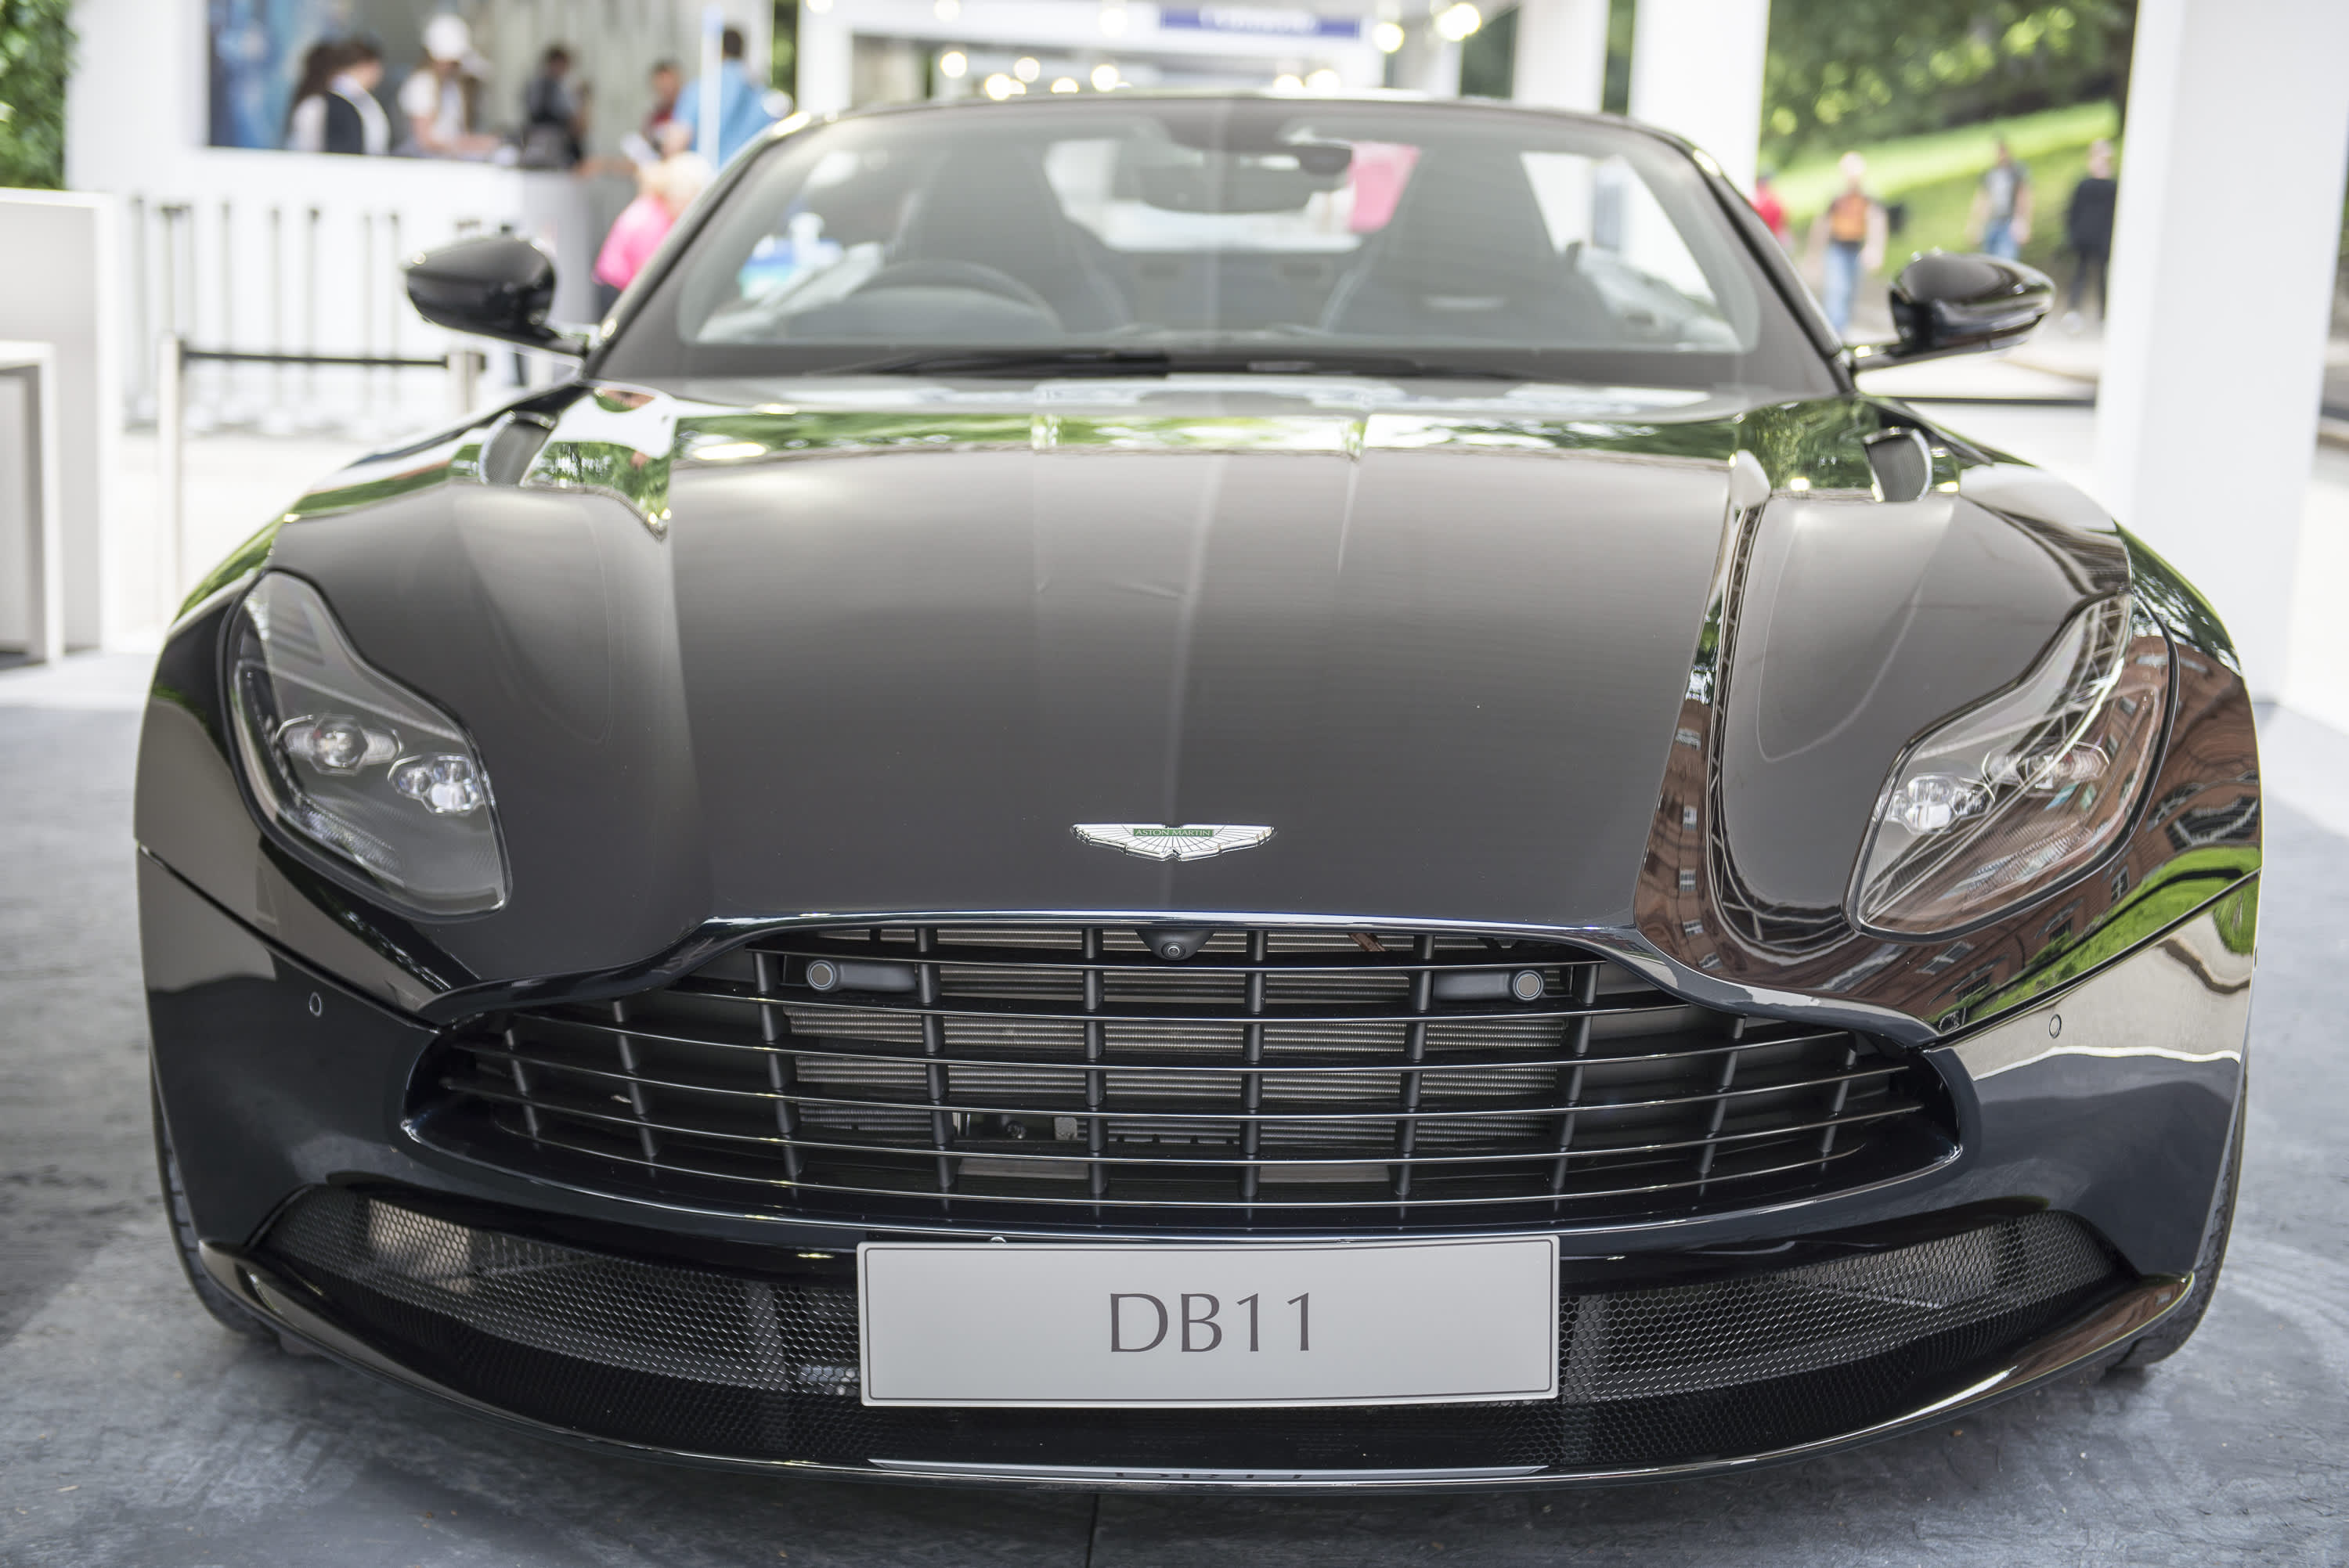 Luxury automaker Aston Martin's stock fell 12% as losses nearly doubled